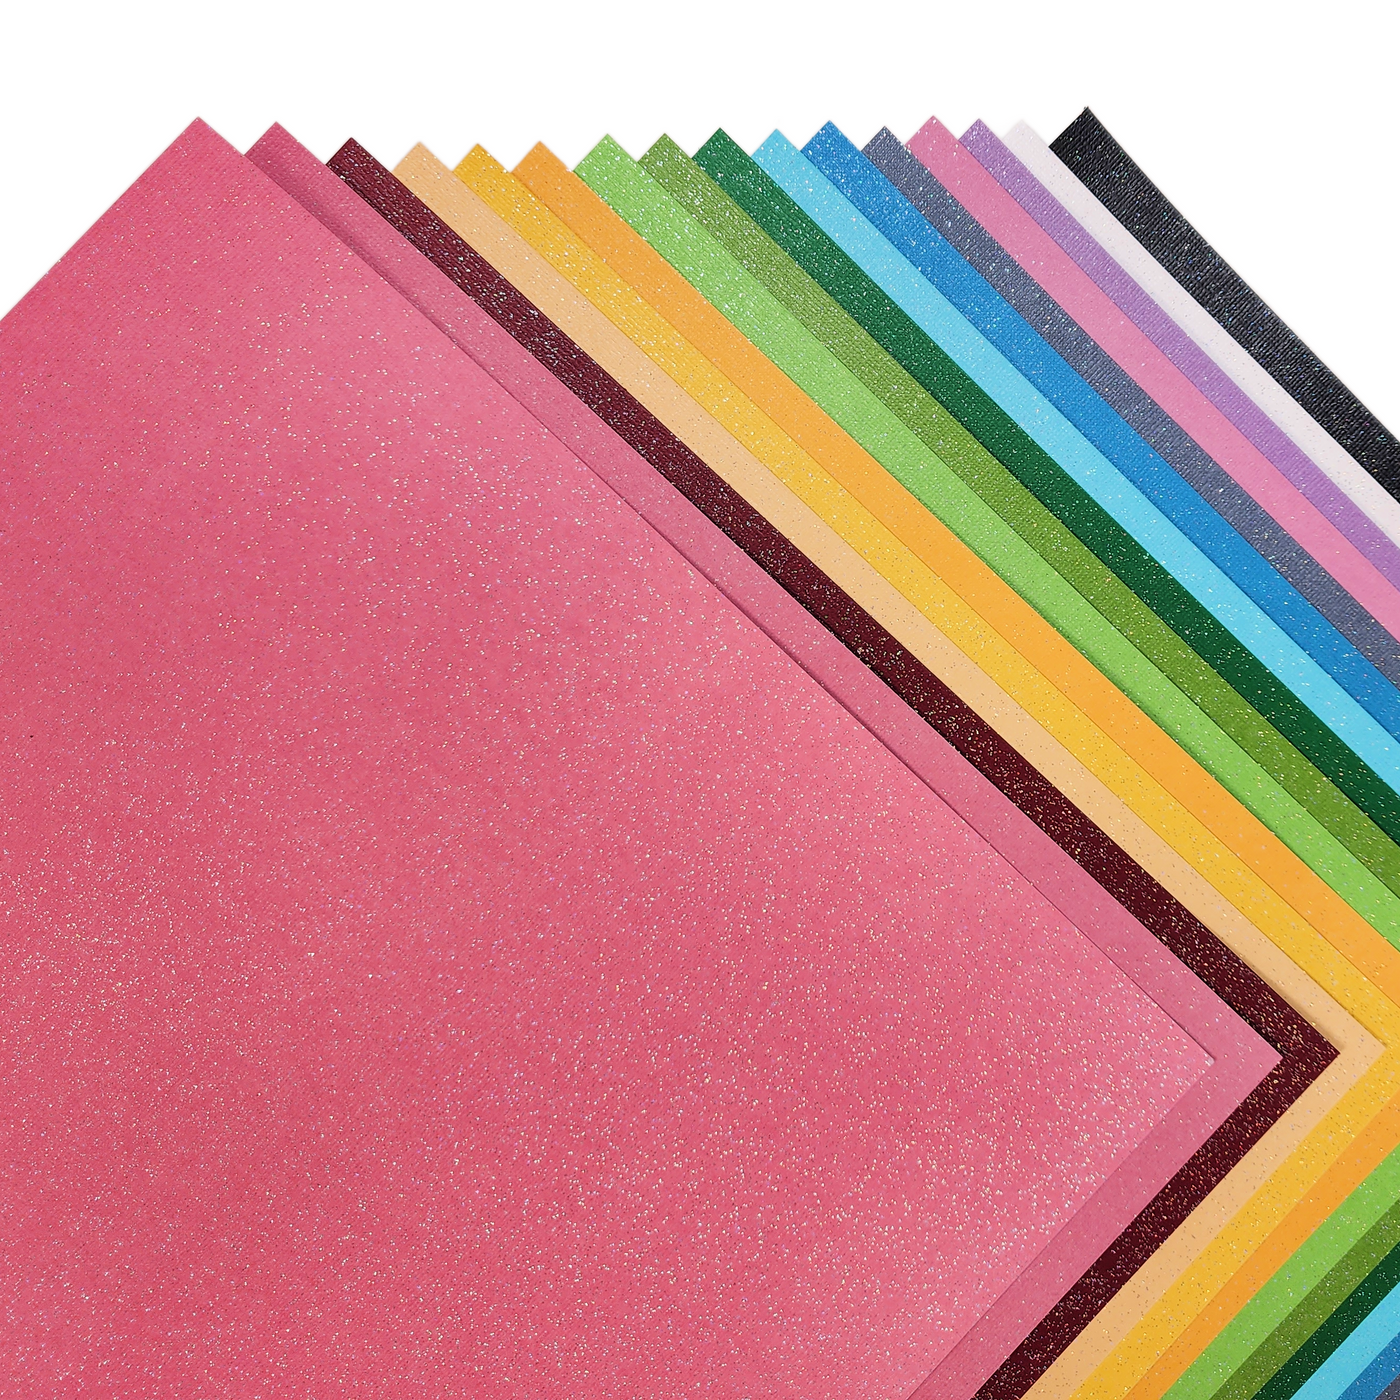 Complete variety pack of Couture Cardstock by Core'dinations—textured cardstock with a dusting of glitter that holds fast. Solid core, 80# cardstock for holiday paper crafts.